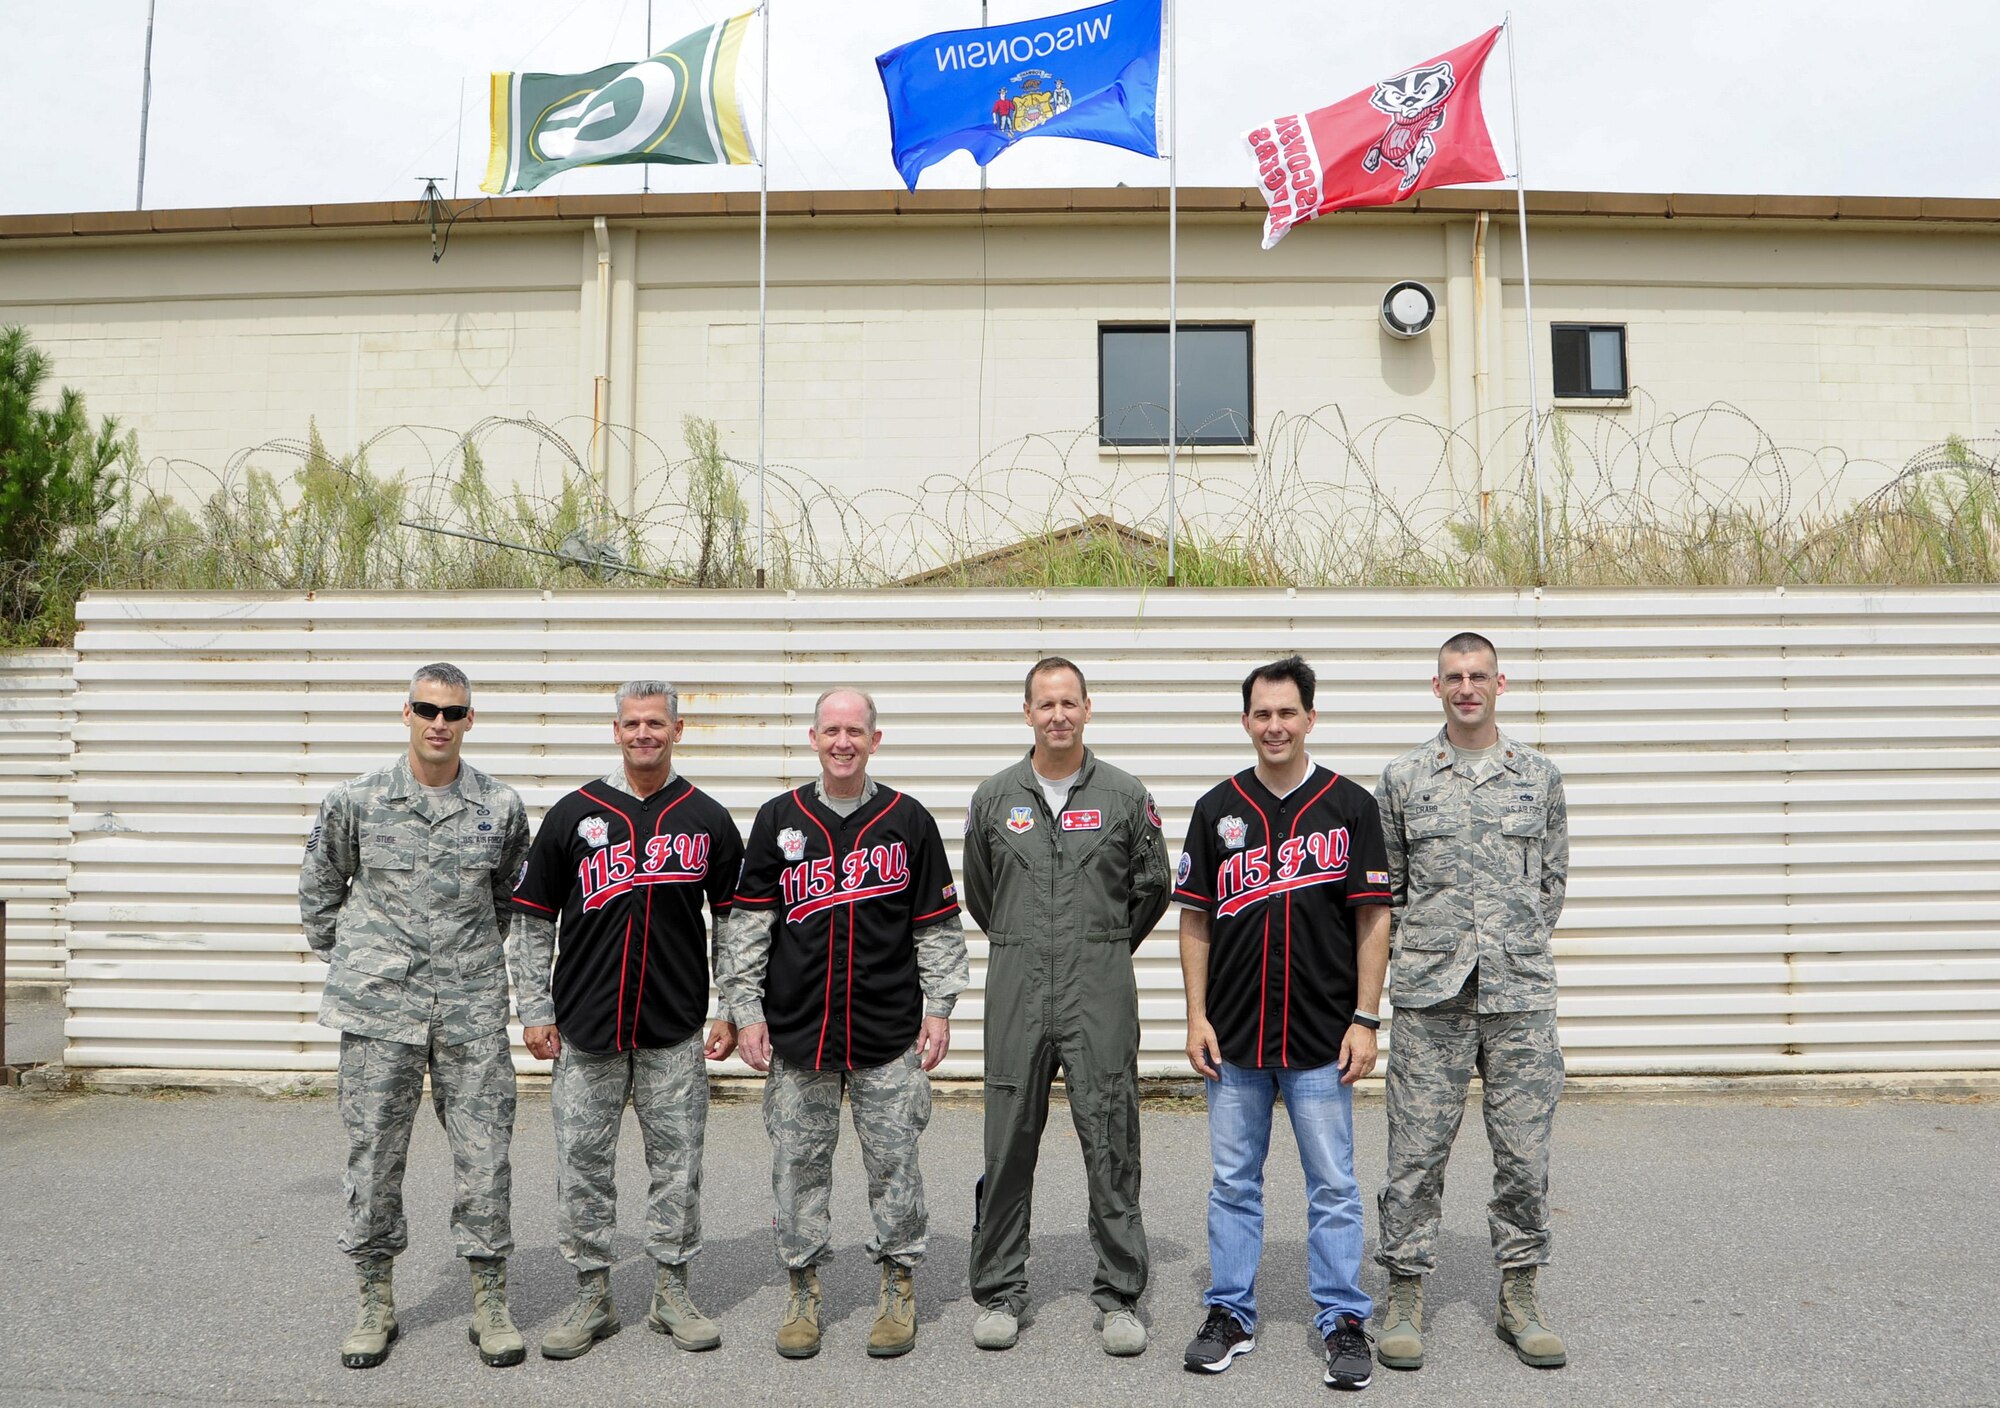 U.S. Air Force Chief Master Sgt. Thomas Safer, 115th Fighter Wing, Wisconsin Air National Guard command chief (left), Maj. Gen. Donald Dunbar, Wisconsin‘s adjutant general (middle), and The Honorable Scott Walker, Governor of Wisconsin (right), wear traditional Wolf Pack jerseys presented by 115th FW leadership at Kunsan Air Base, Republic of Korea, Sept. 16, 2017. Walker and Wisconsin Air National Guard leadership visited Airmen from the 115th FW deployed to Kunsan for a 4-month rotation as part of a Theater Security Package, which helps to maintain regional security and stability. (U.S. Air Force photo by Senior Airman Colby L. Hardin)